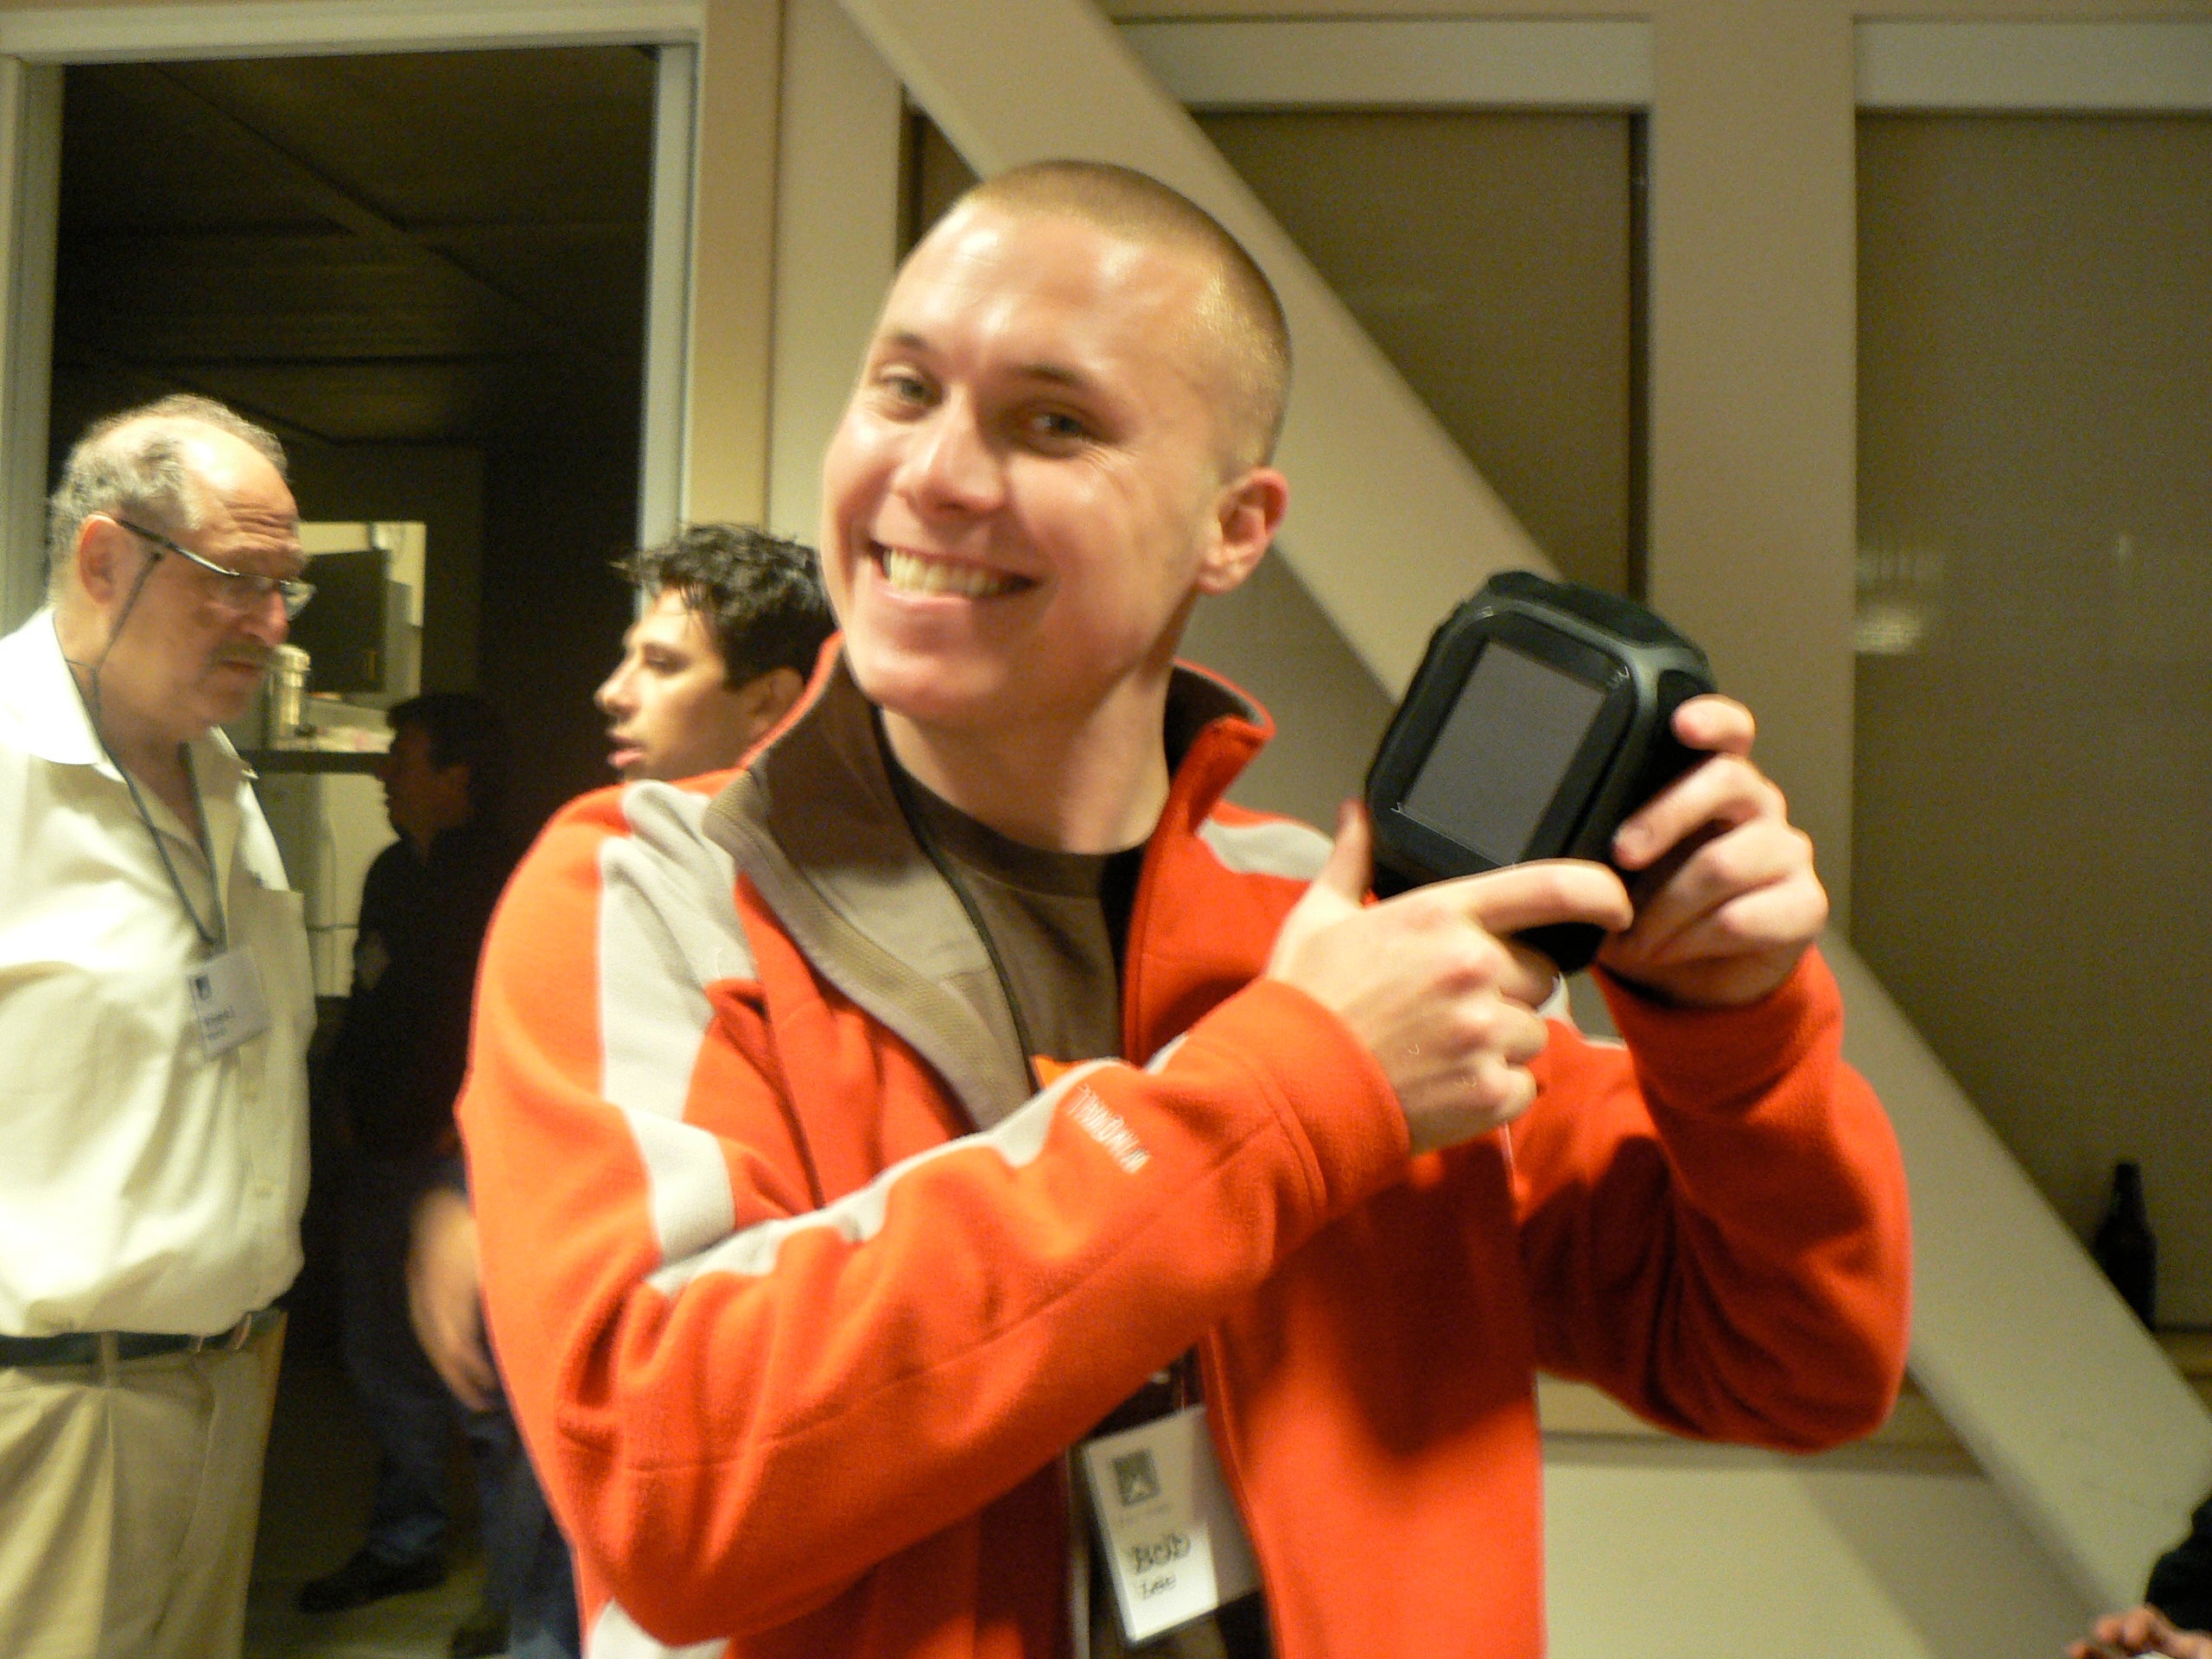 Bob Lee at a tech conference in his mid-20s in 2006